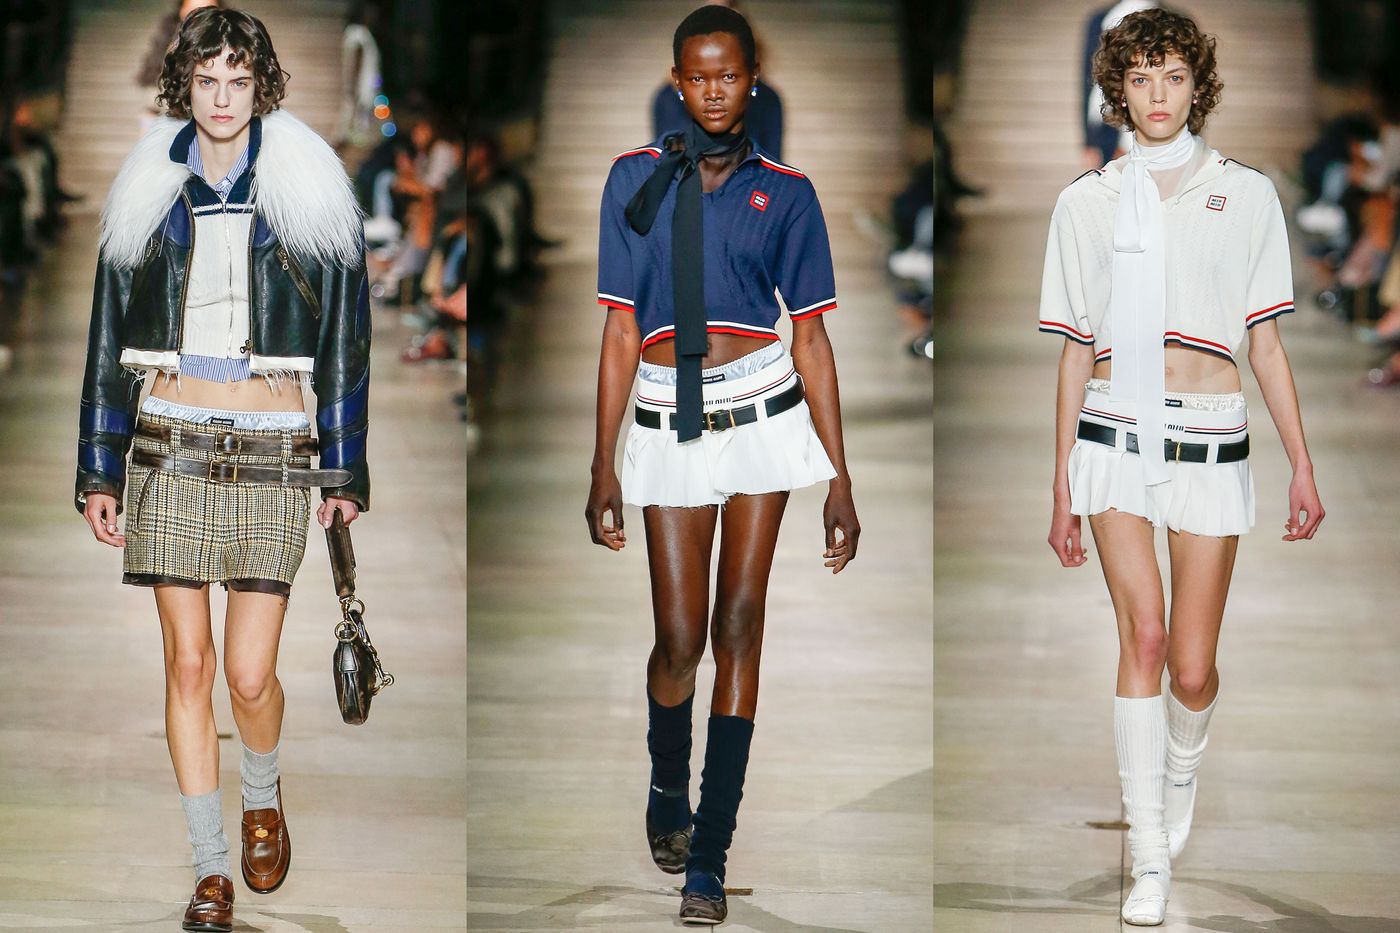 Socks and sandals bring whiff of scandal to Paris catwalk